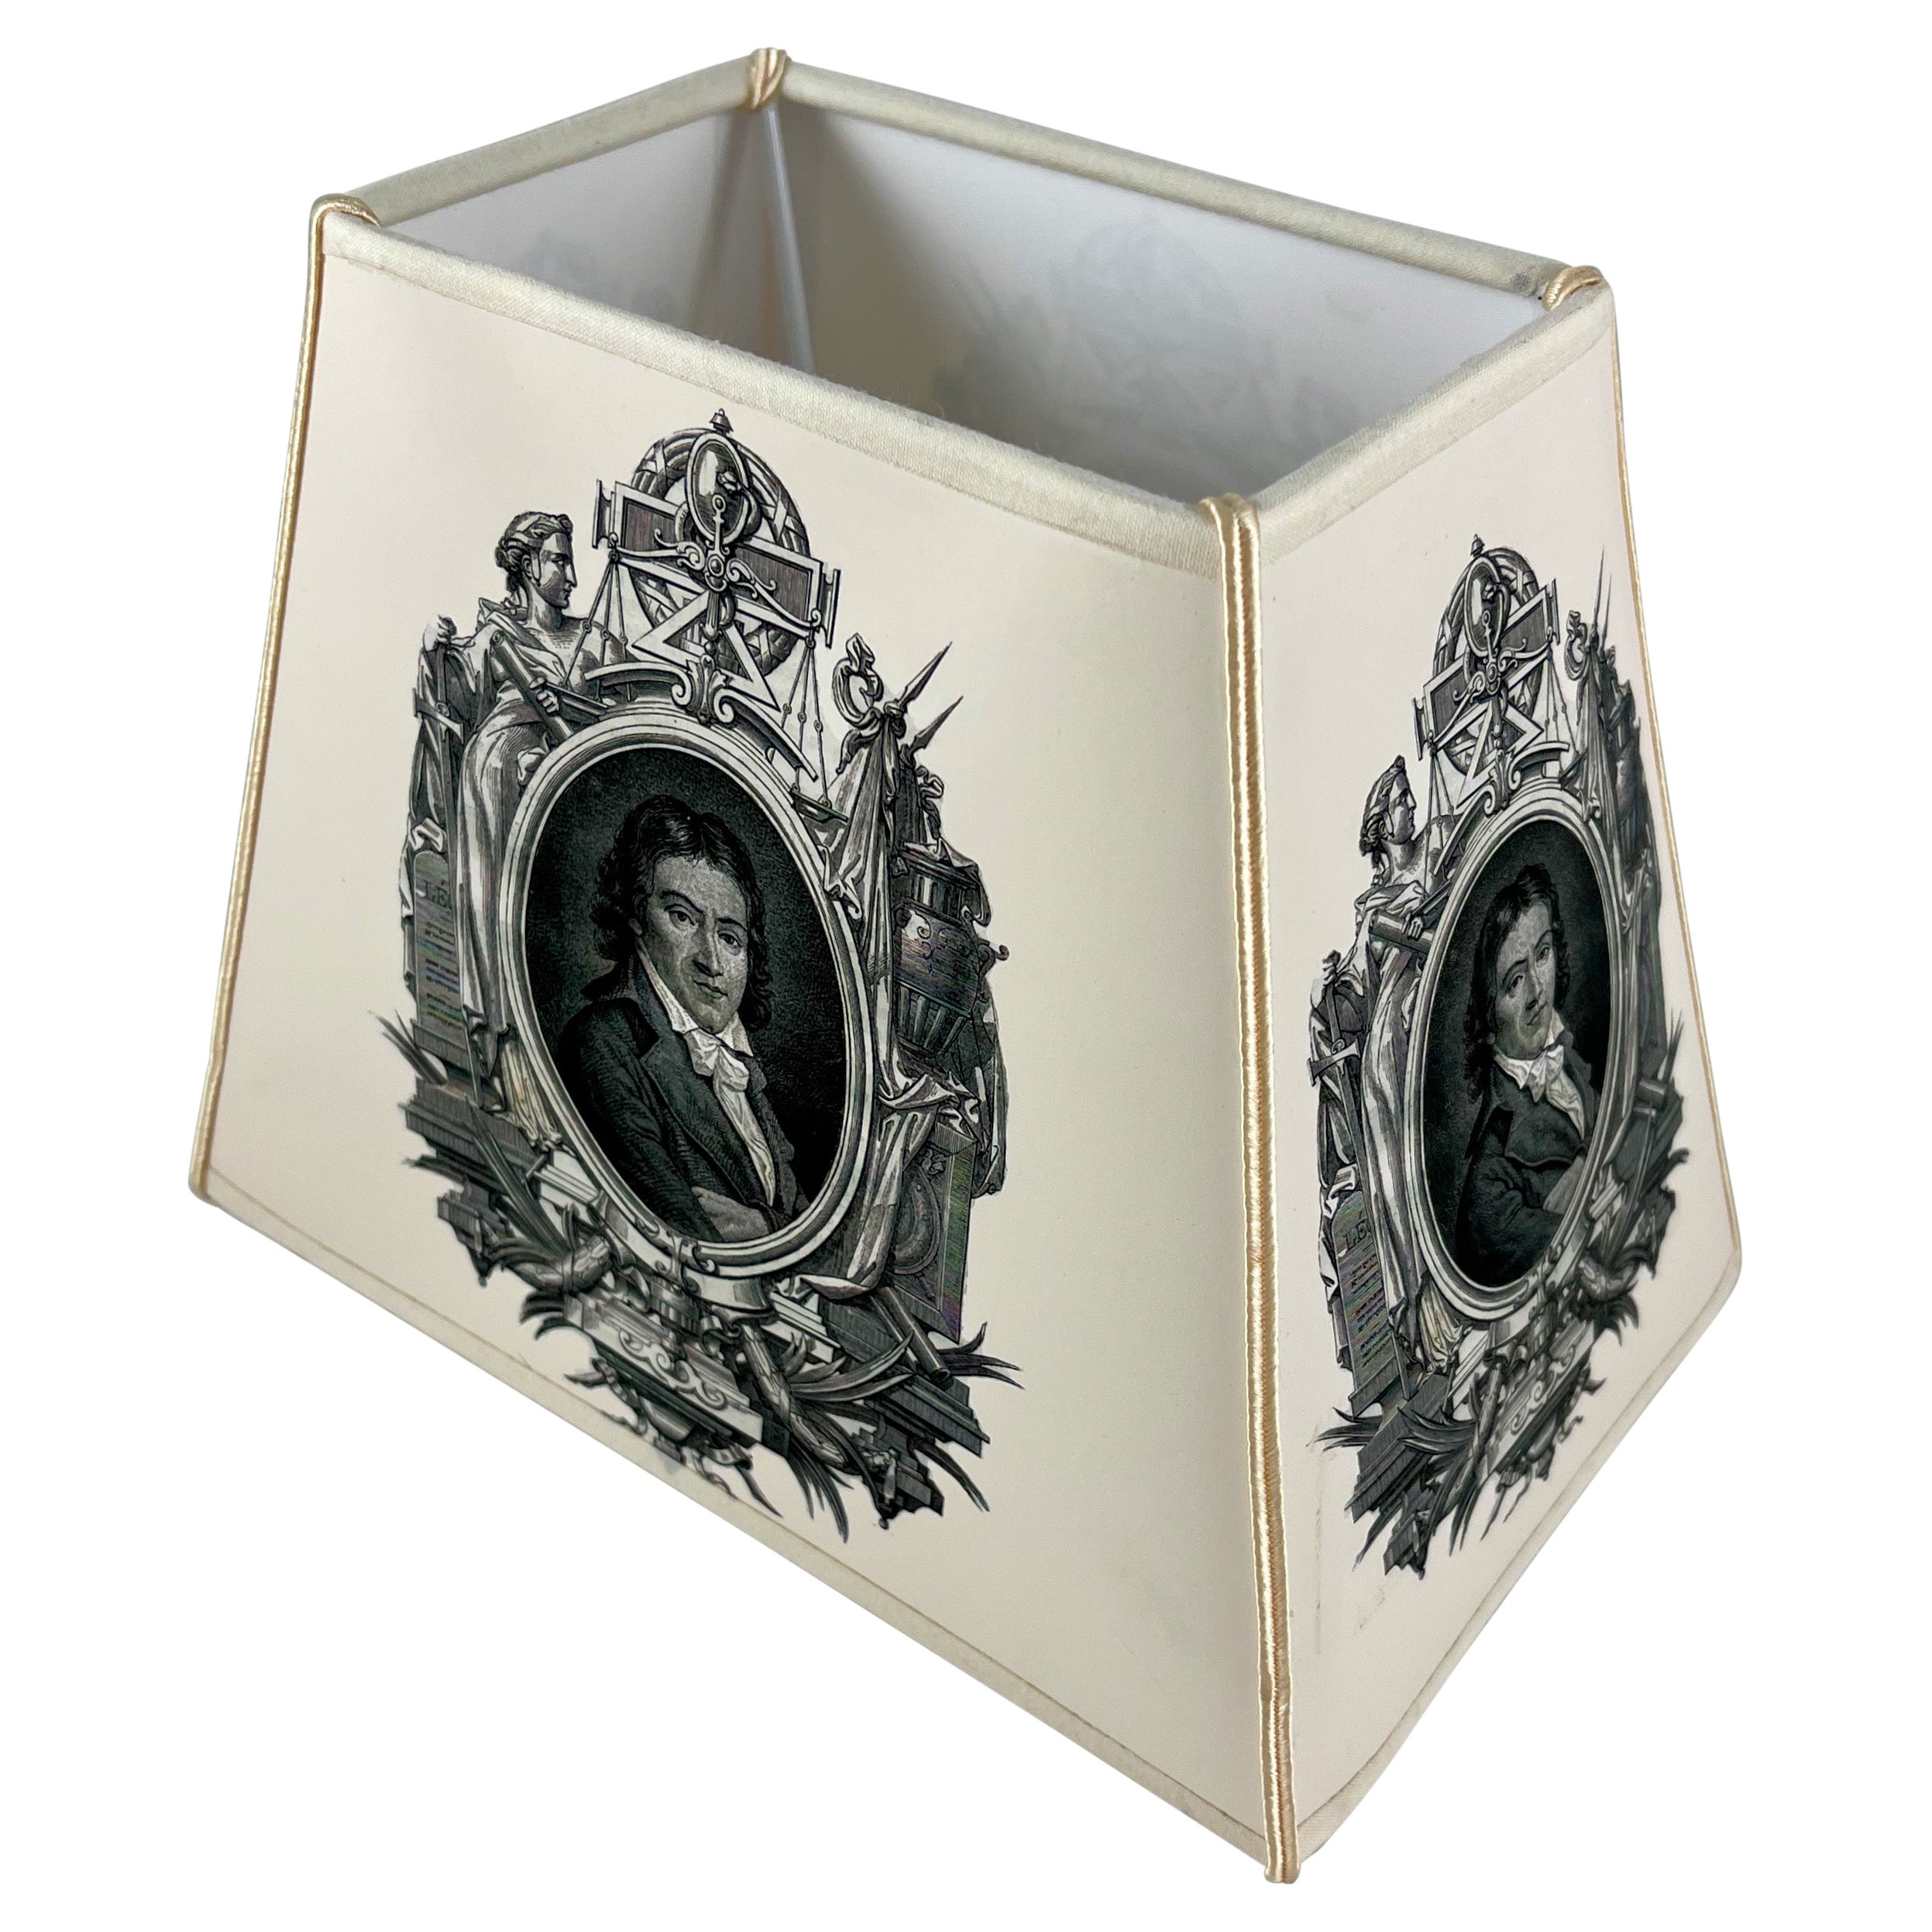 Handmade French Vellum Printed Lampshade, a Neo-Classical Empire Gentleman